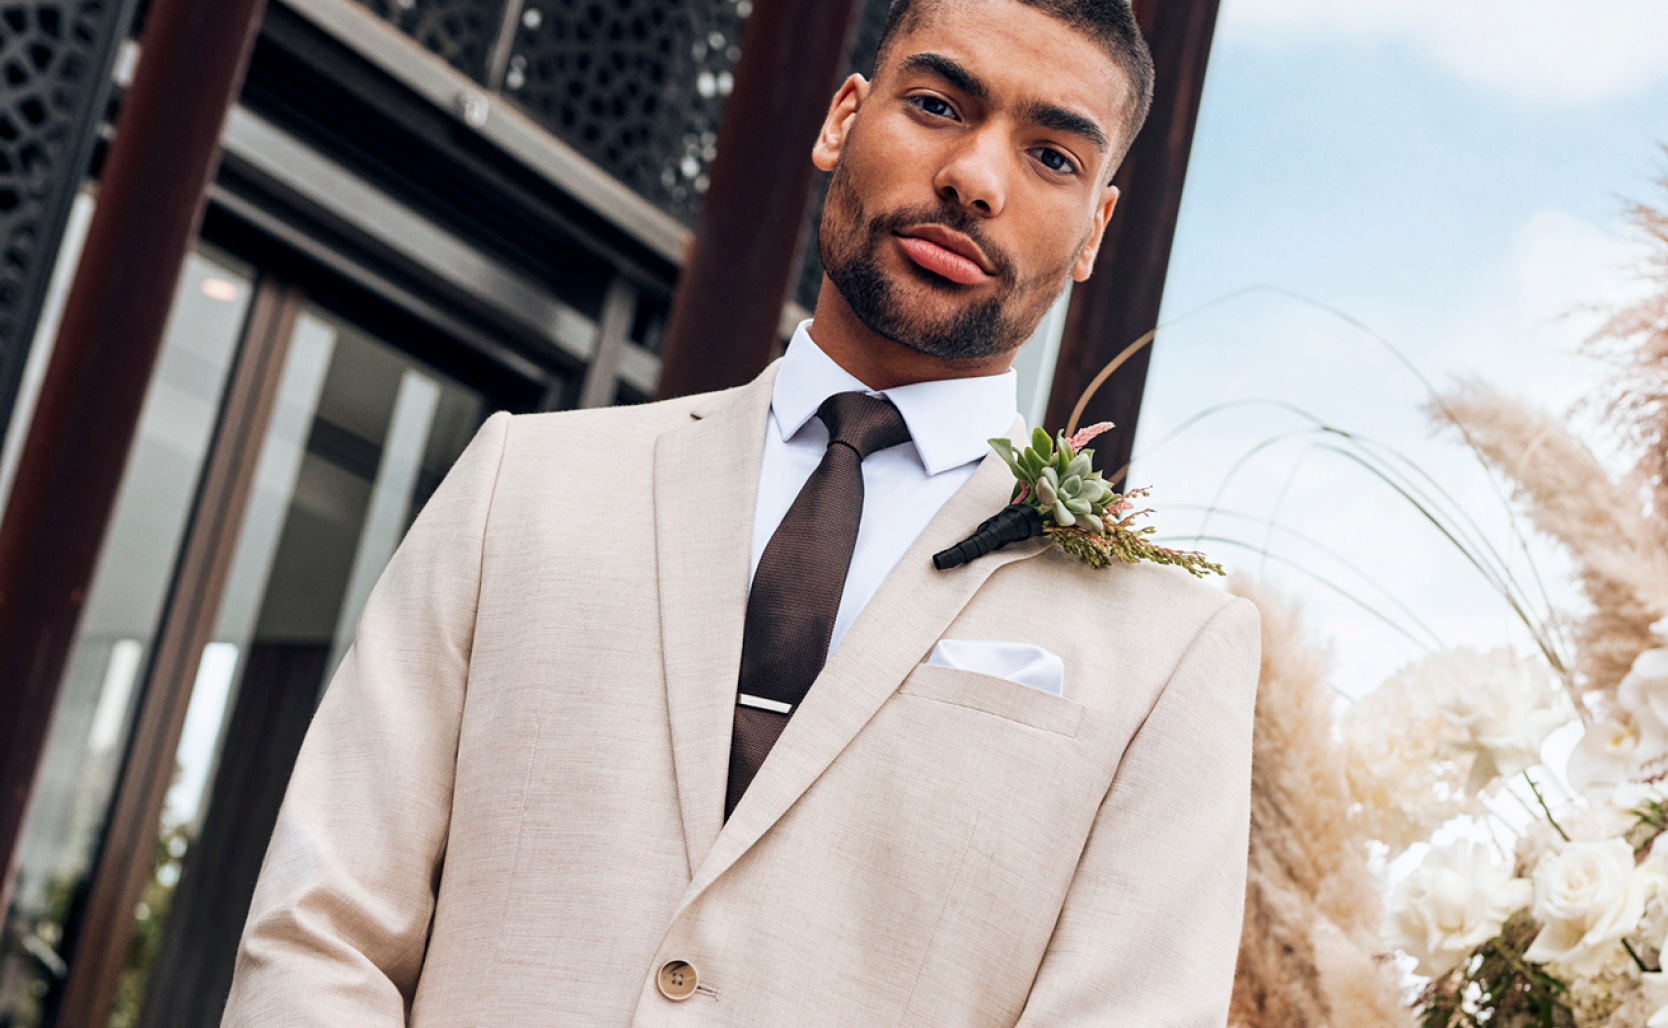 Image of model on hotel deck looking into camera wearing natural coloured suit with White button up shirt and burgundy tie